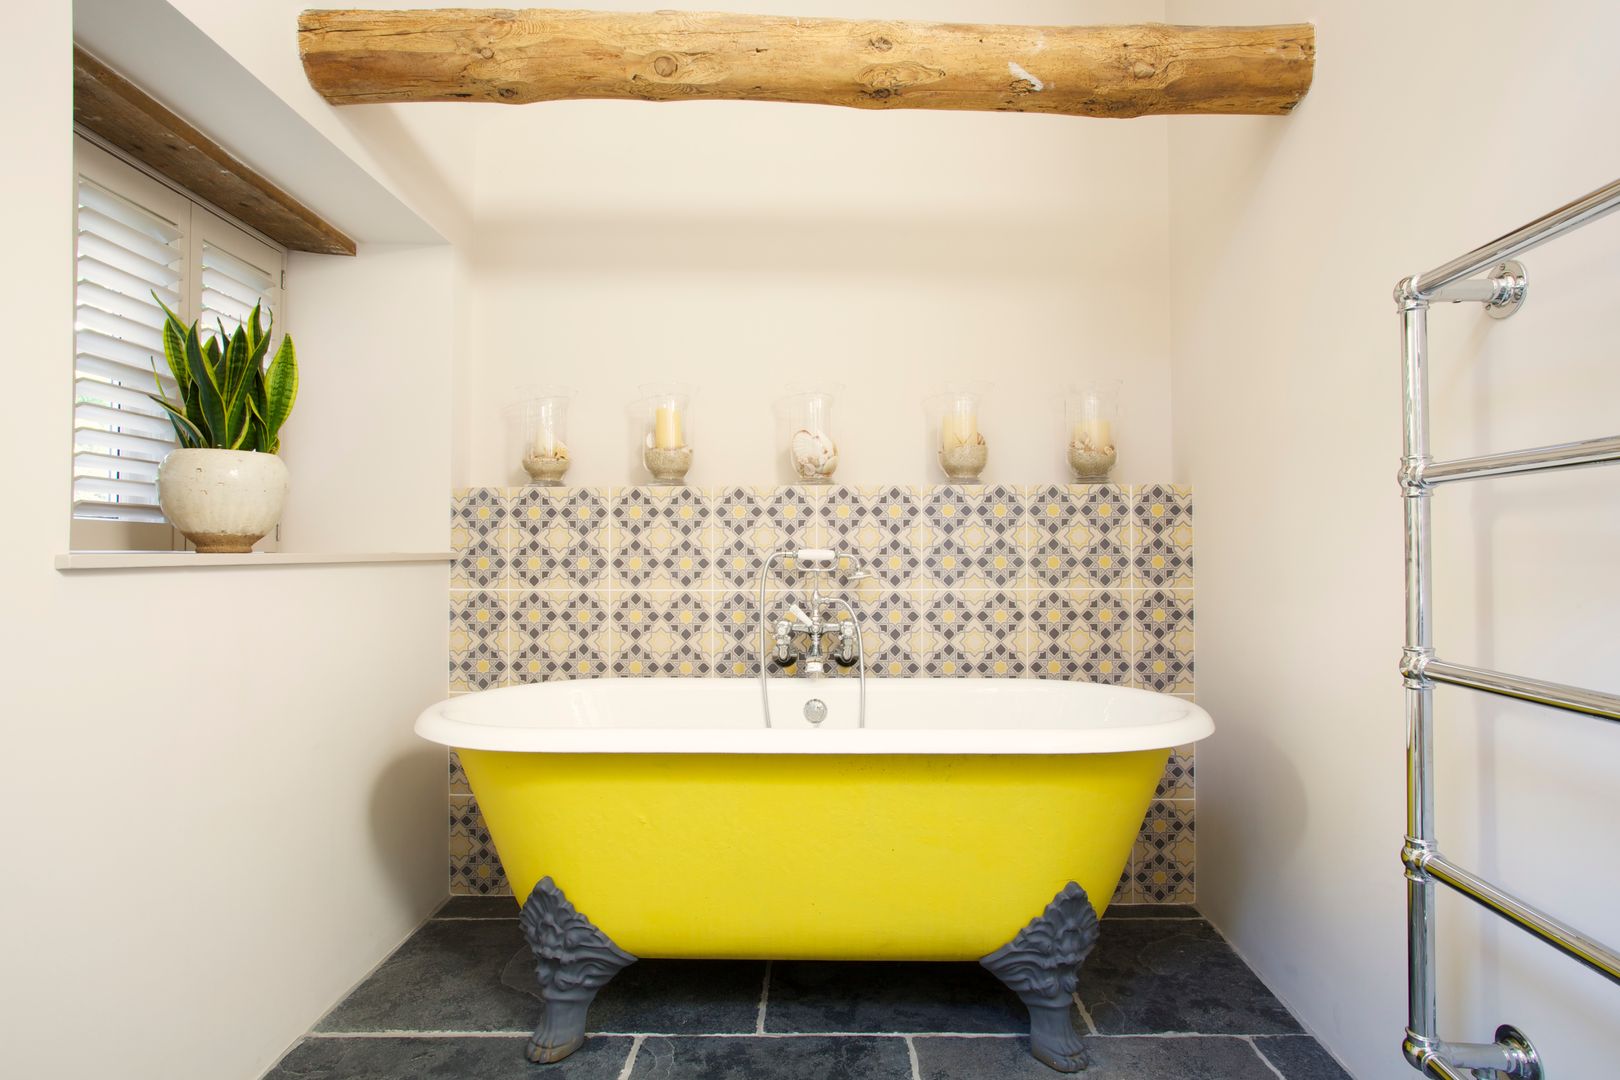 Dartmoor Farmstead, Woodford Architecture and Interiors Woodford Architecture and Interiors Bathroom آئرن / اسٹیل